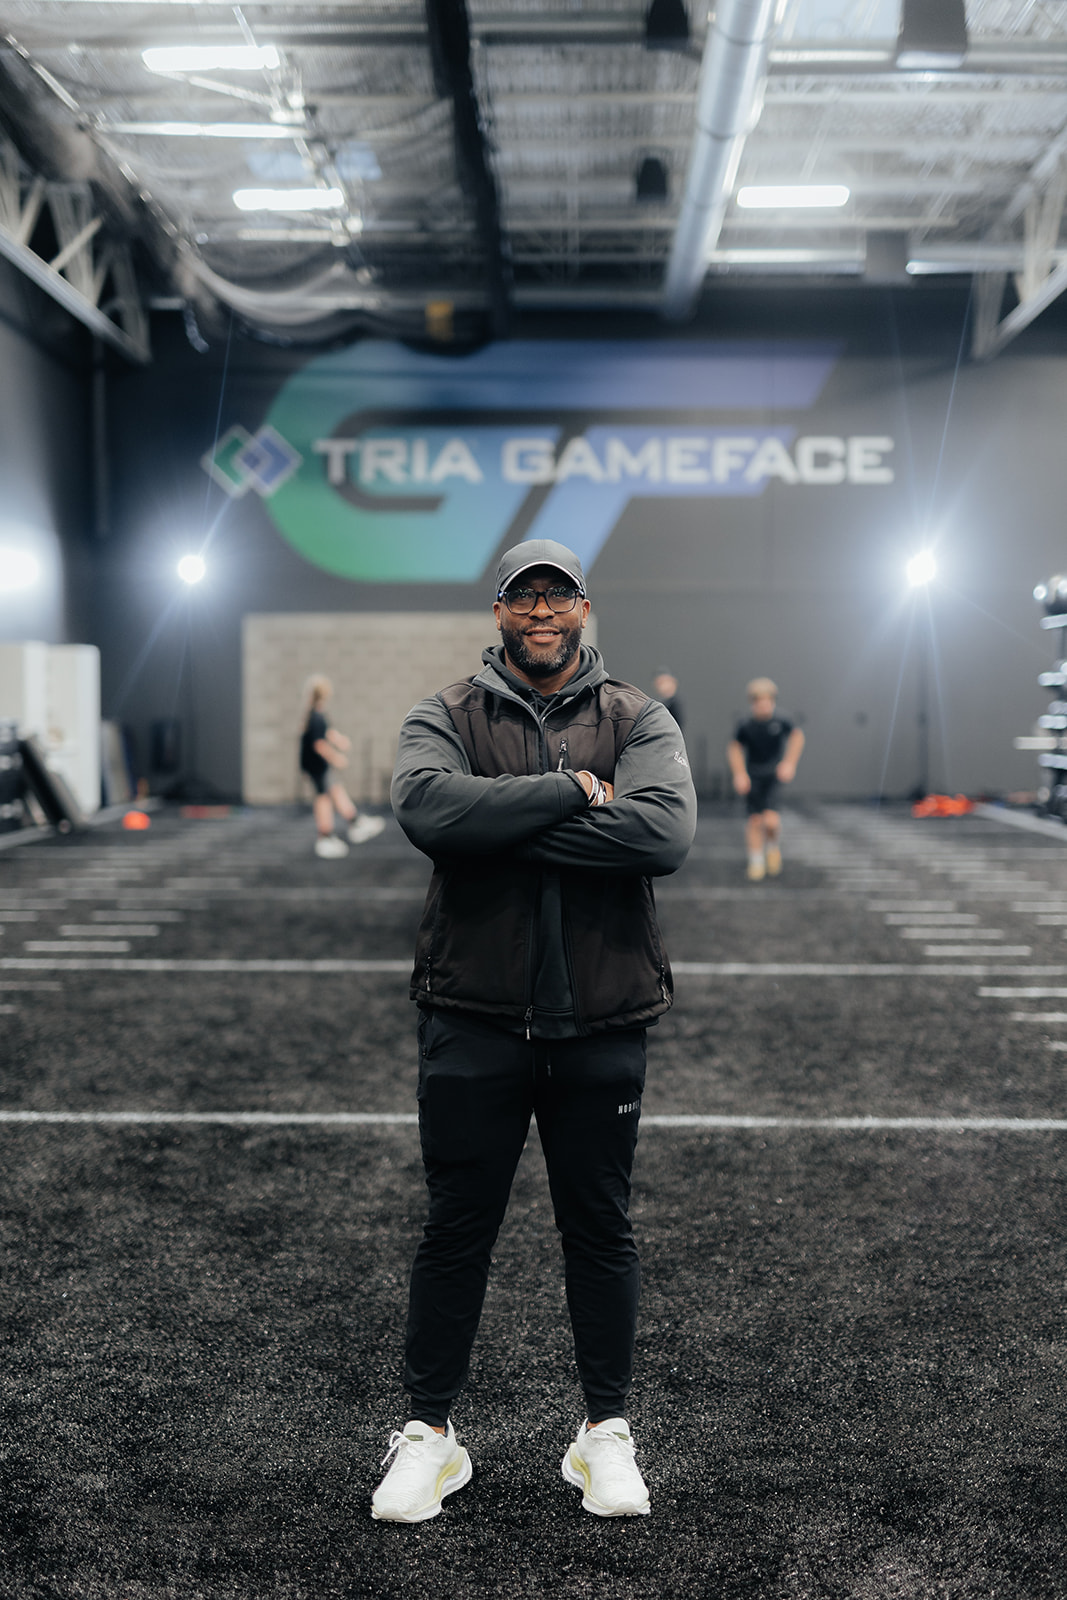 TRIA GameFace founder, DeVentri Jordan smiling at his training facility in St. Louis Park, MN